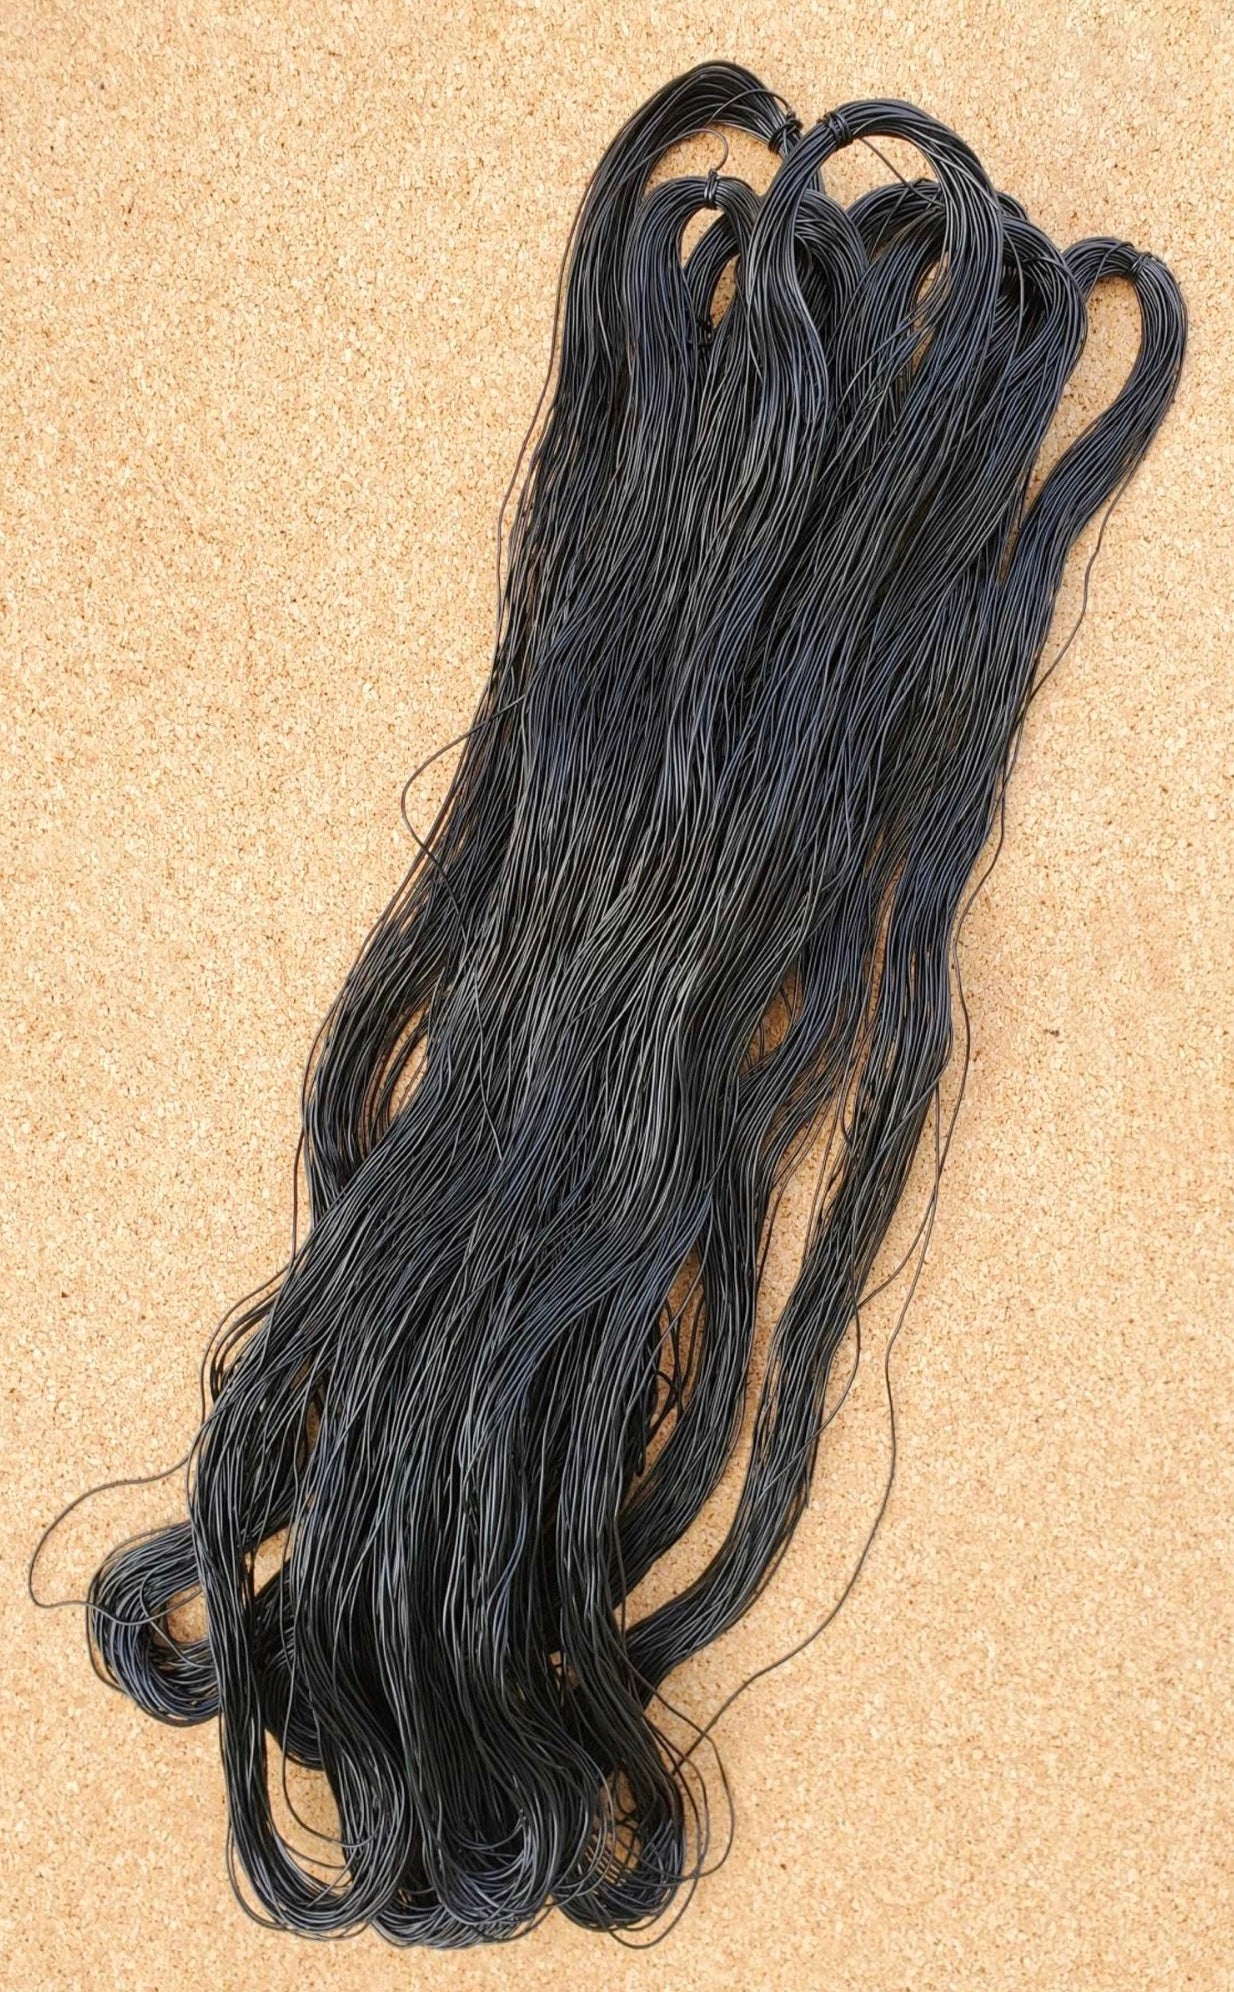 3 New African Rubber Hair Thread For Threading/Stretching Out Natural